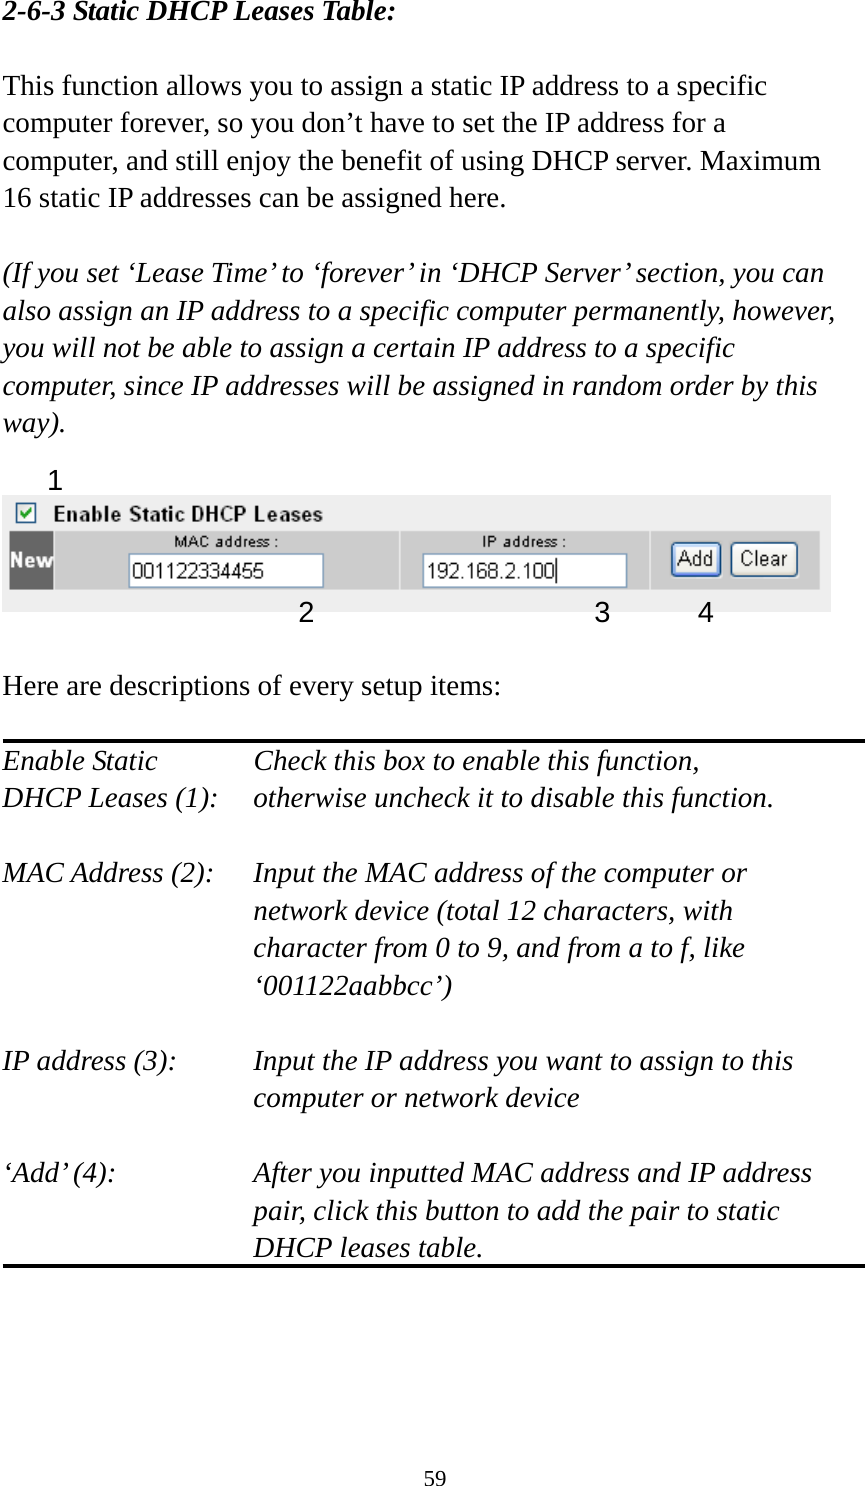 59 2-6-3 Static DHCP Leases Table:  This function allows you to assign a static IP address to a specific computer forever, so you don’t have to set the IP address for a computer, and still enjoy the benefit of using DHCP server. Maximum 16 static IP addresses can be assigned here.  (If you set ‘Lease Time’ to ‘forever’ in ‘DHCP Server’ section, you can also assign an IP address to a specific computer permanently, however, you will not be able to assign a certain IP address to a specific computer, since IP addresses will be assigned in random order by this way).     Here are descriptions of every setup items:  Enable Static      Check this box to enable this function, DHCP Leases (1):    otherwise uncheck it to disable this function.  MAC Address (2):    Input the MAC address of the computer or network device (total 12 characters, with character from 0 to 9, and from a to f, like ‘001122aabbcc’)   IP address (3):    Input the IP address you want to assign to this computer or network device    ‘Add’ (4):    After you inputted MAC address and IP address pair, click this button to add the pair to static DHCP leases table.     1 2 3 4 